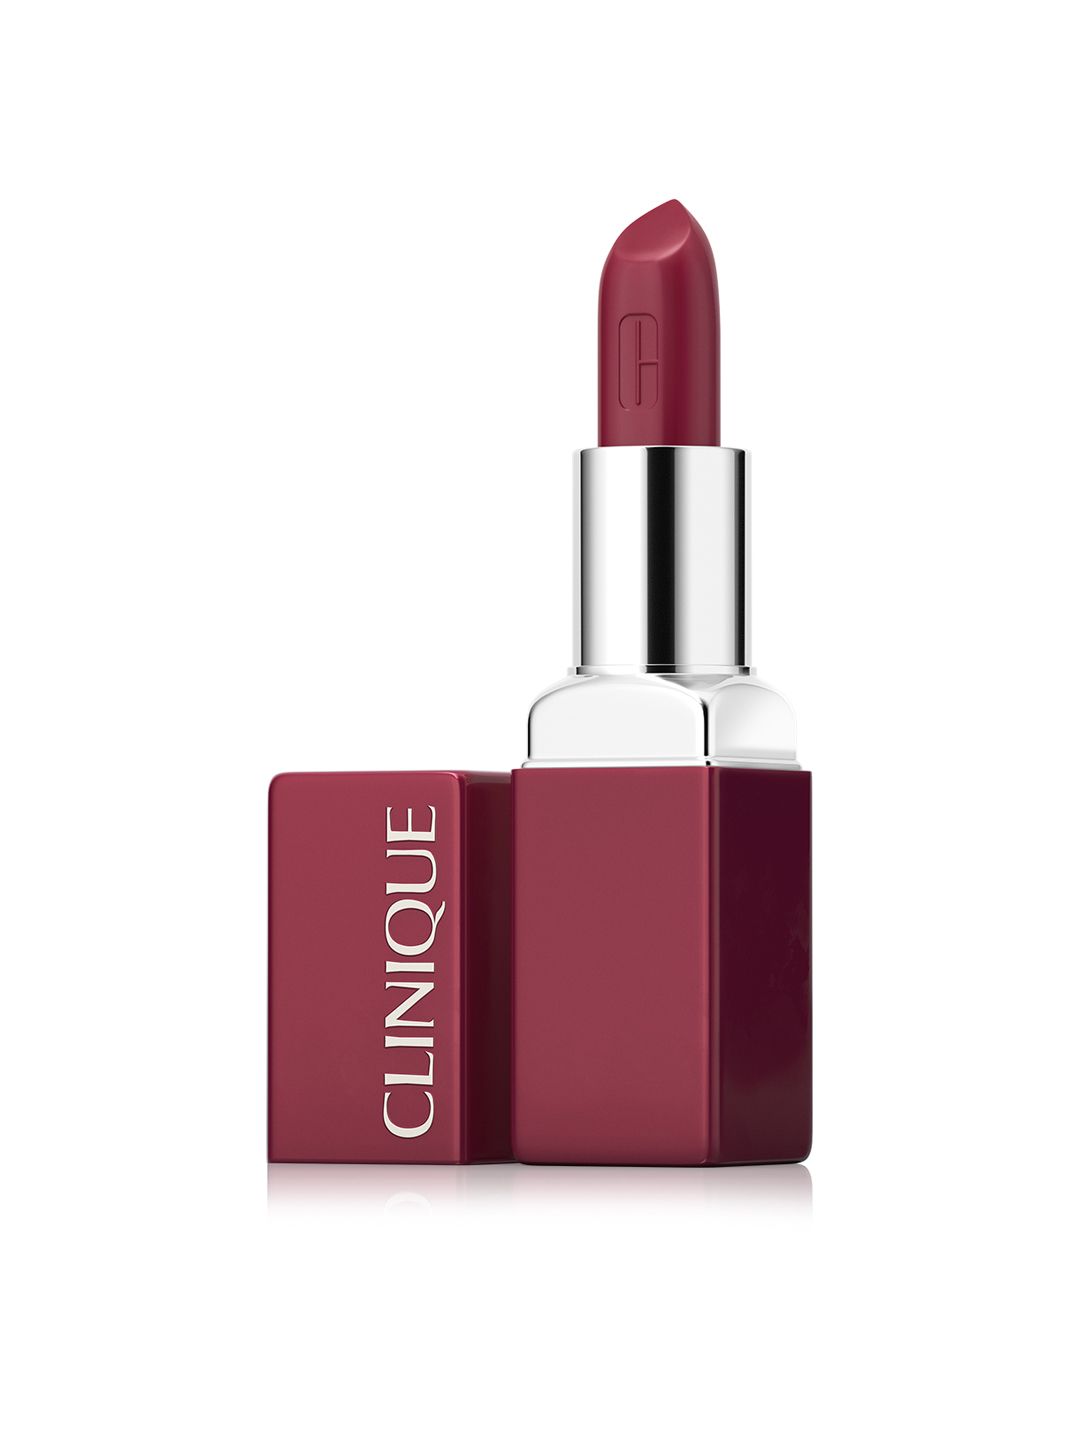 Clinique Pop Reds Cheek & Lip Color - Red Hot 01 Price in India